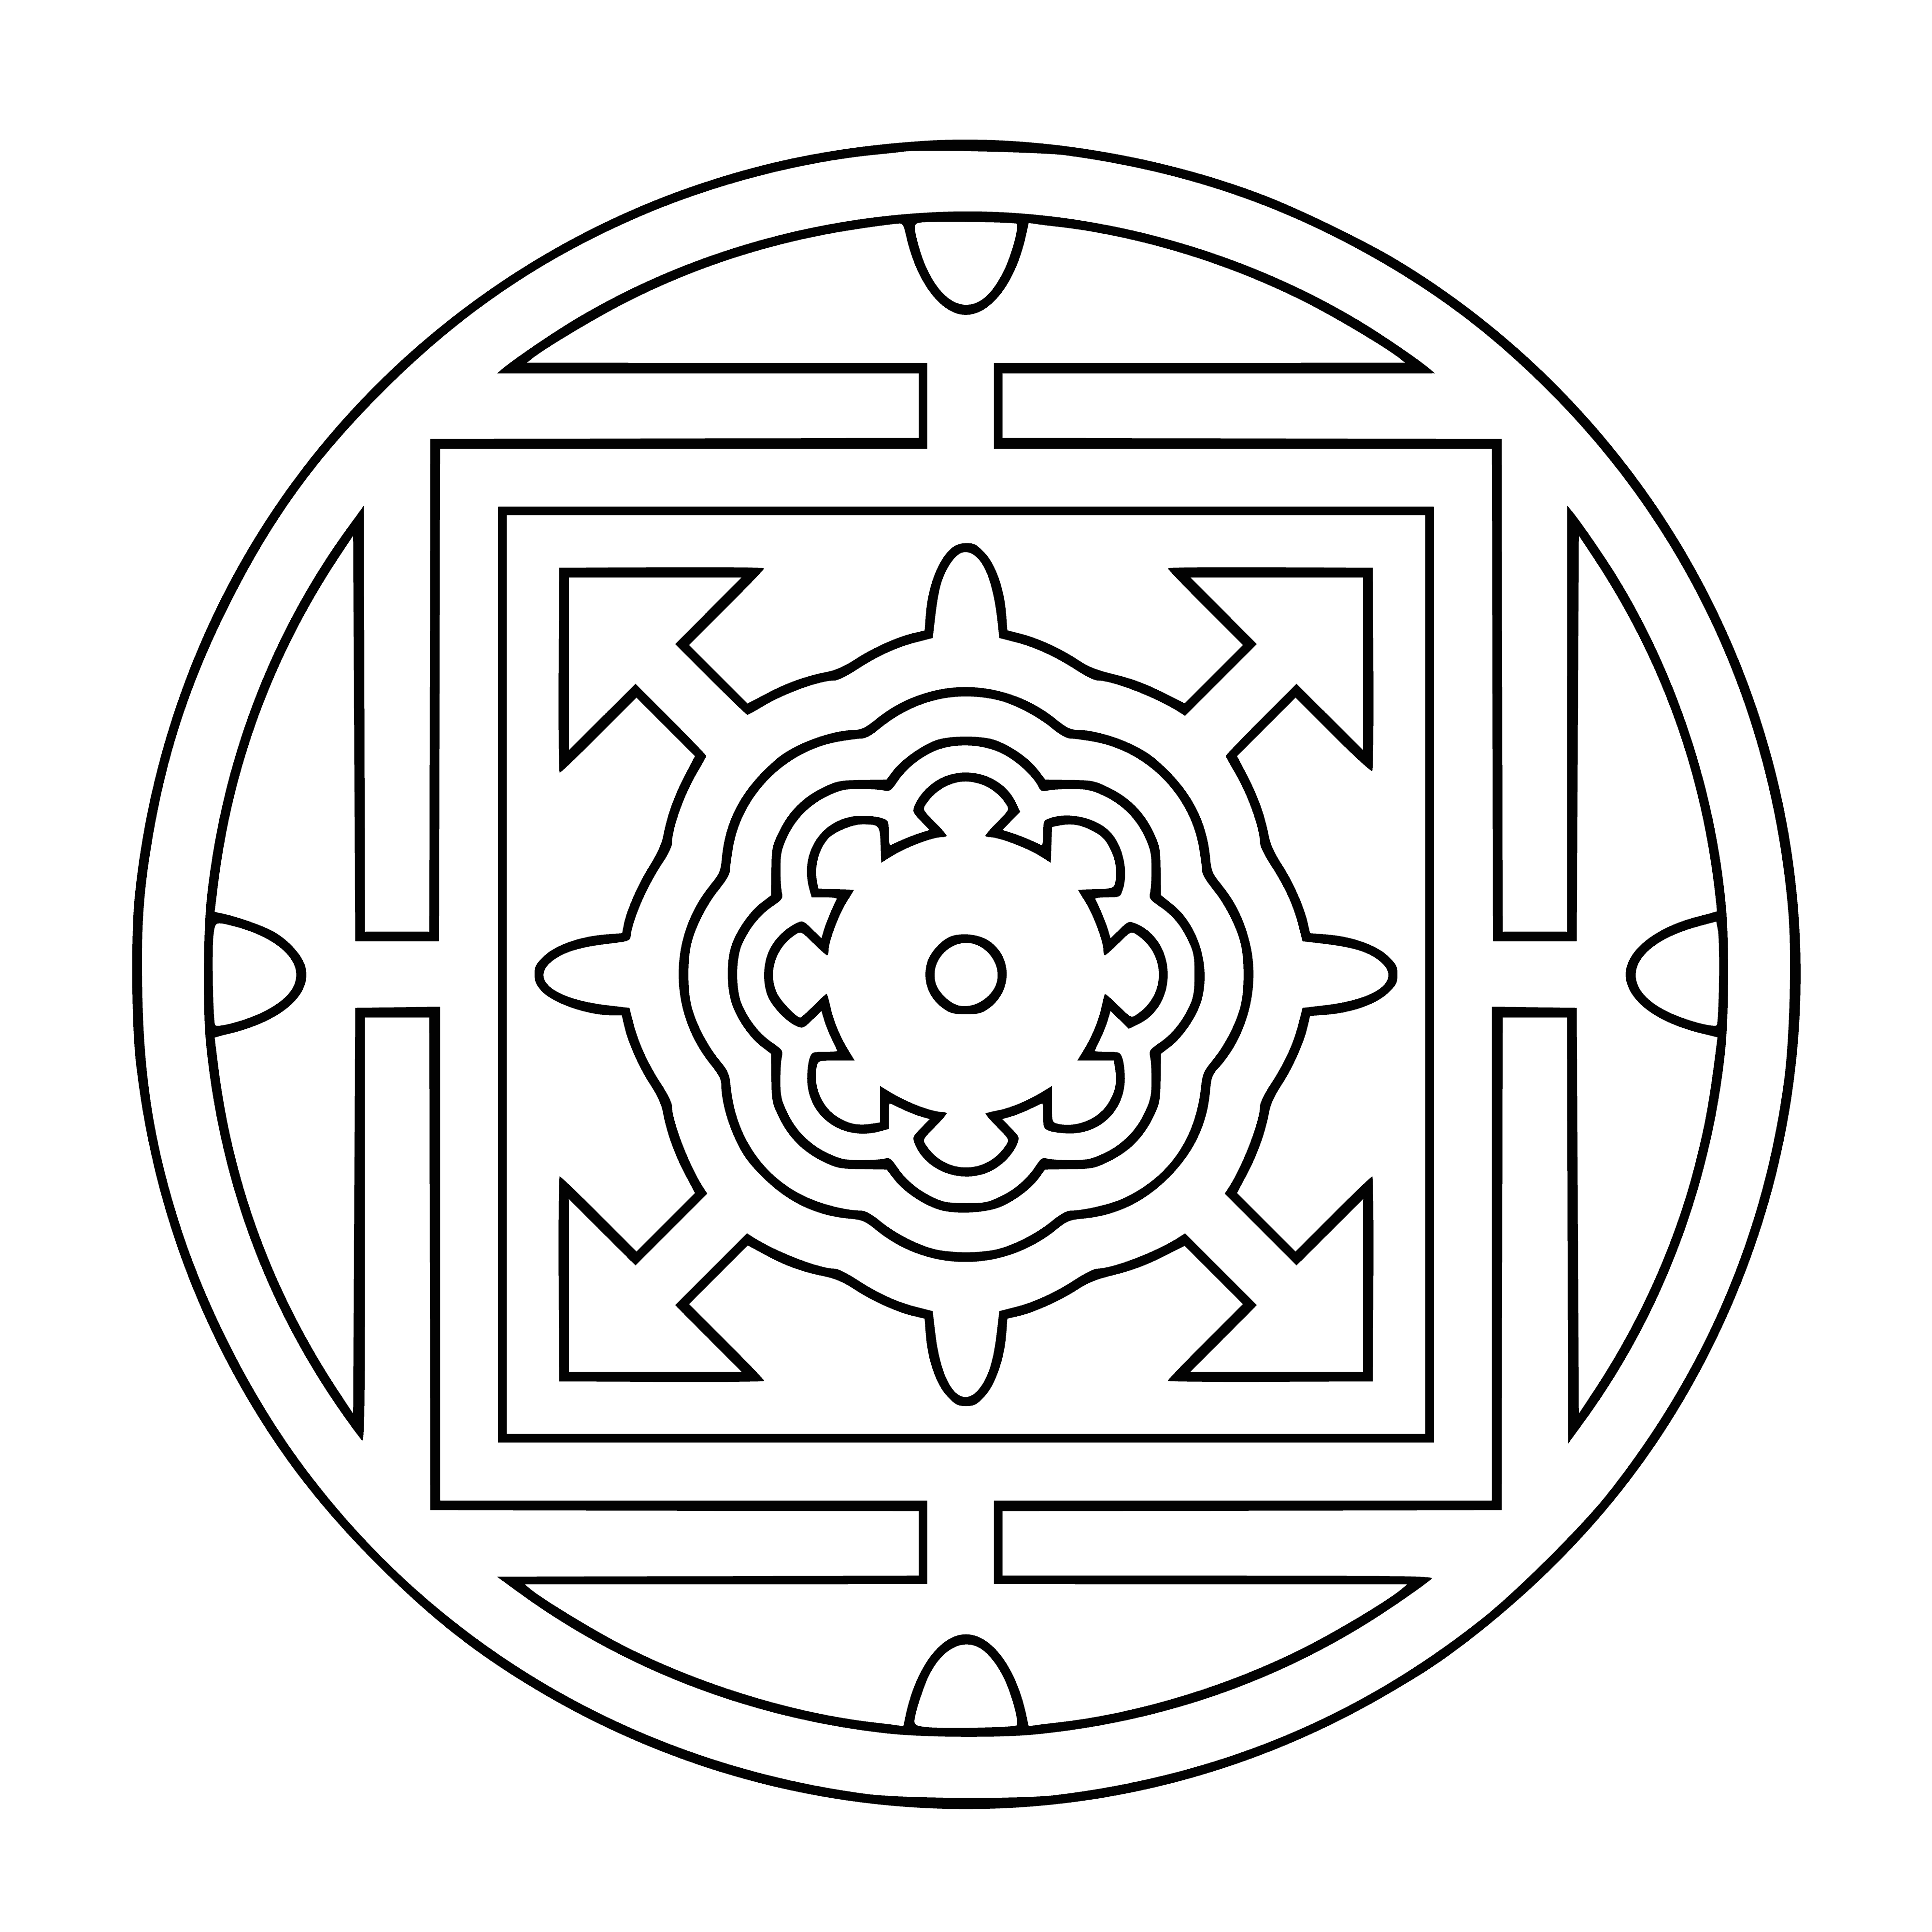 coloring page: Intricate, often symmetrical circular or geometric patterns used for coloring – mandalas provide calming "me" time.